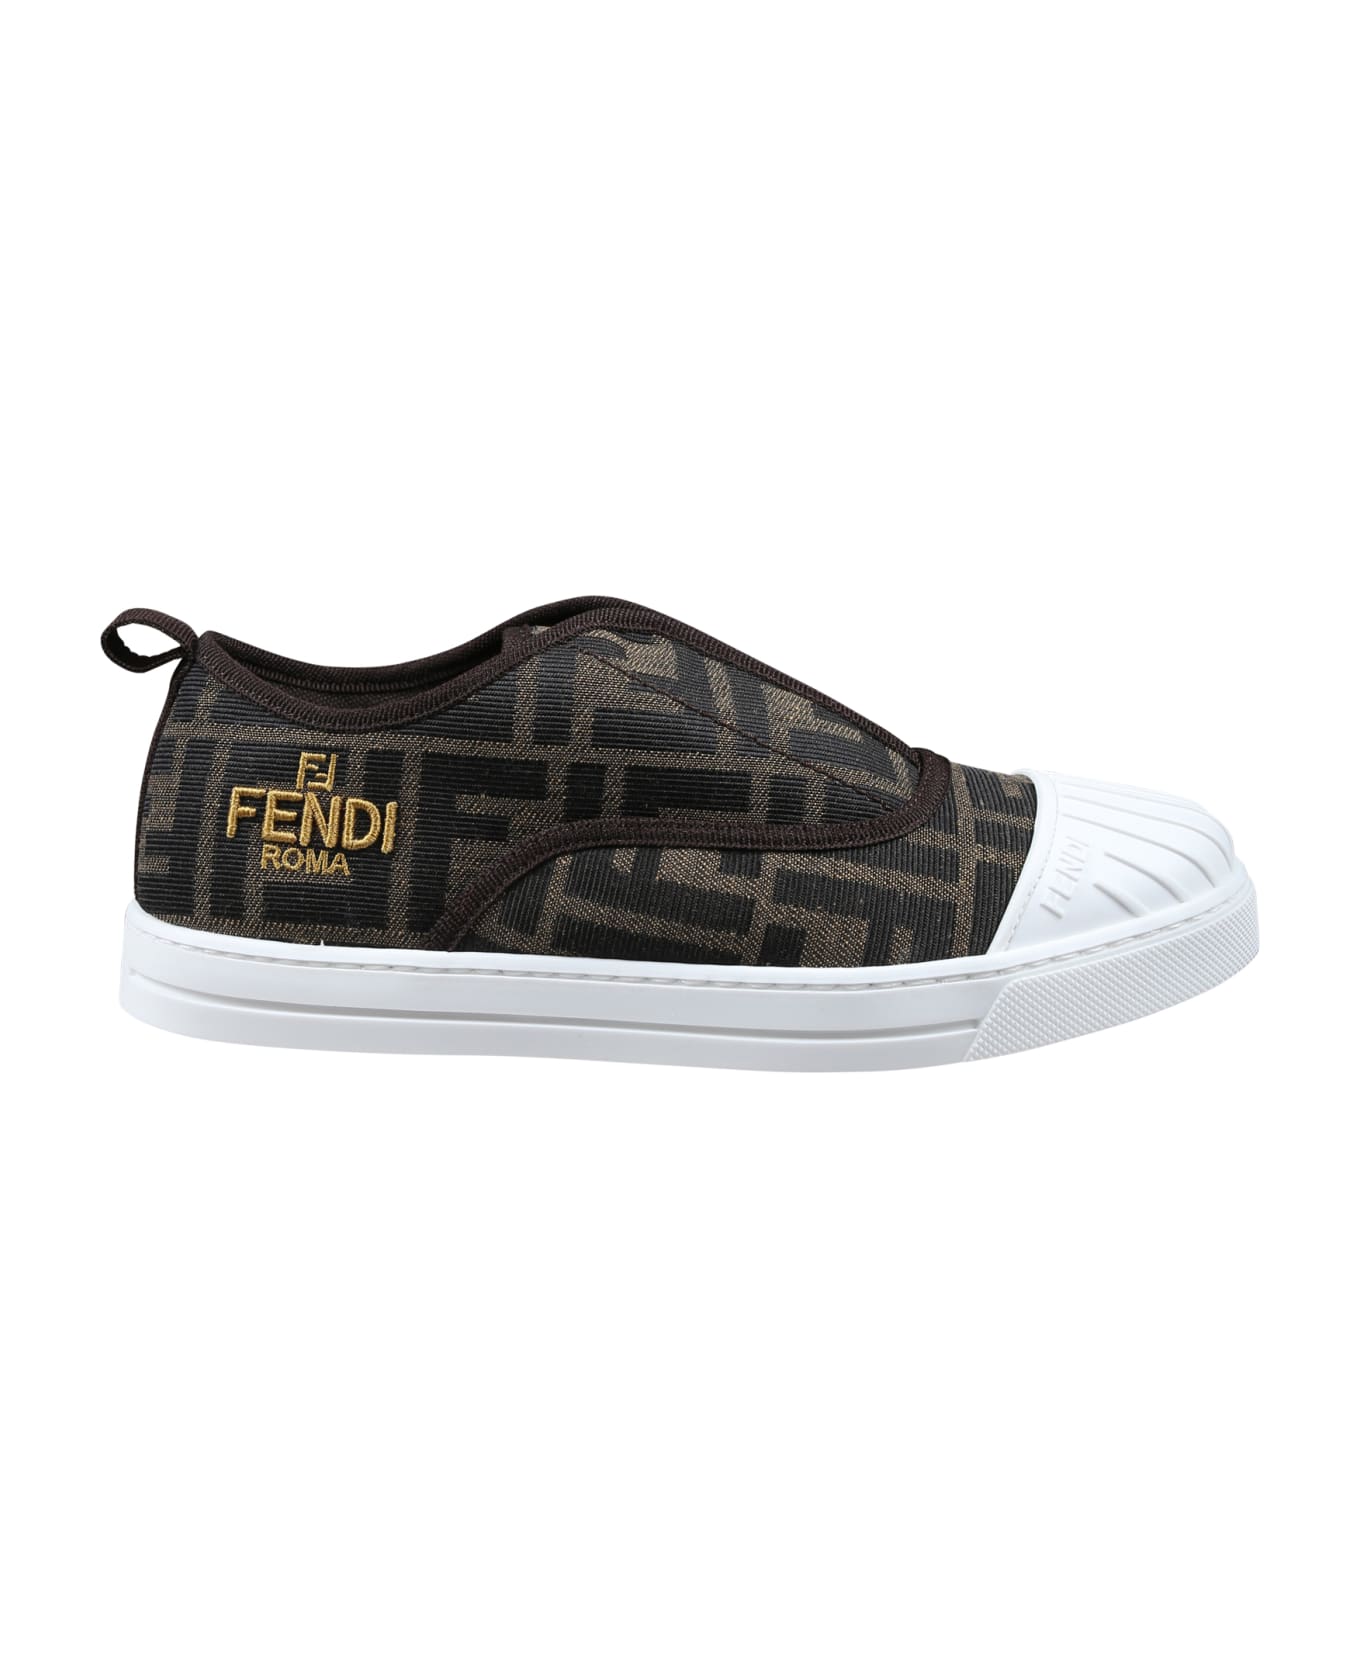 Fendi Sneakers For Kids With All-over Ff Logo - Brown